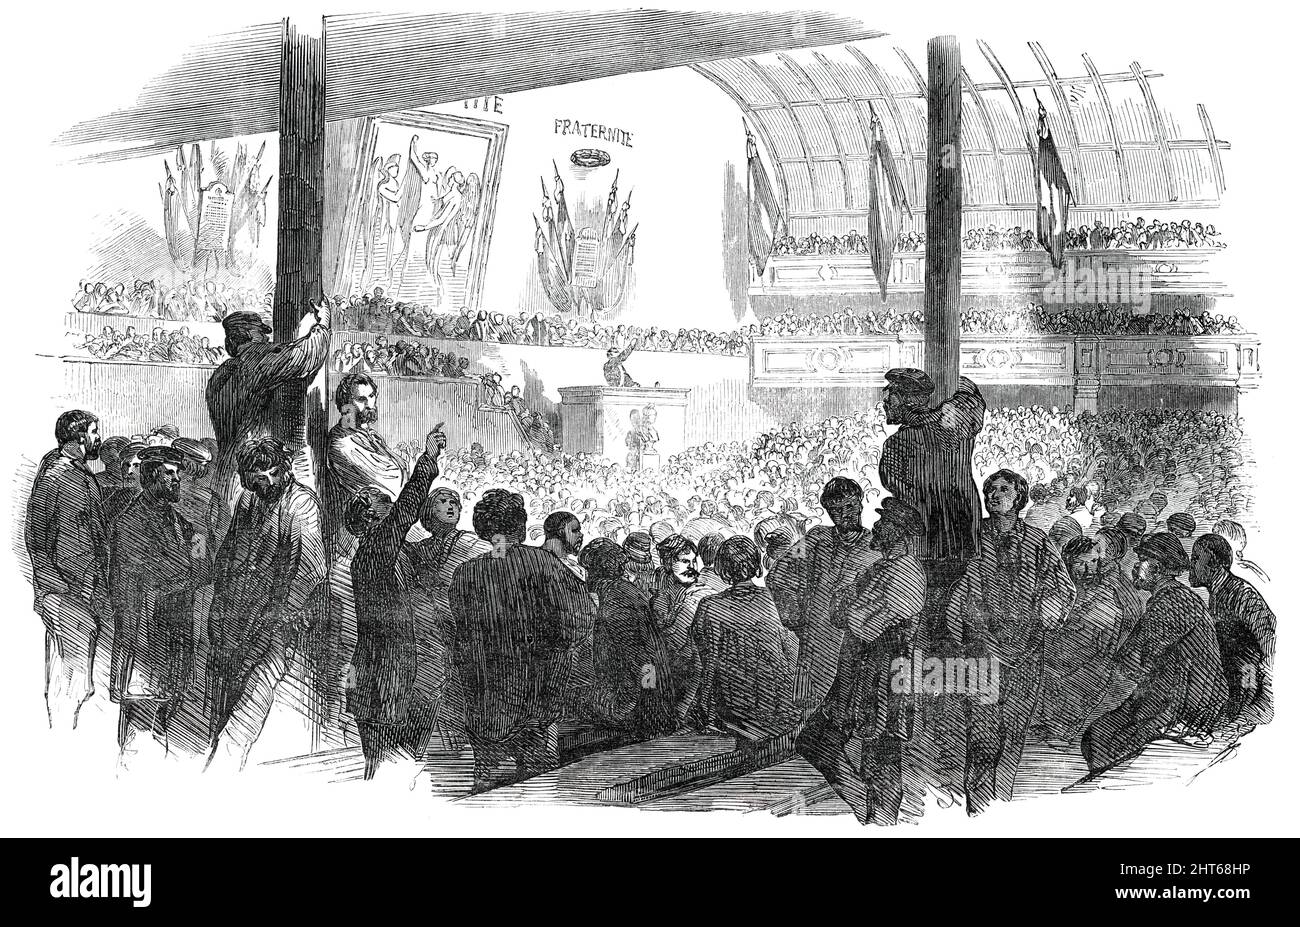 Electoral Meeting in the Salle Martel, Paris, 1850. '...a scene of the present Socialist Electoral agitation...The platform is crowded with well-dressed persons; an orator is in the Tribune; and under him is a bust of Liberty with a Phrygian cap. &quot;There were about 4000 people present, but more than half the number went thither, I am assured, in the expectation of witnessing some fun. Of fun, however, there was very little, the whole time being occupied with a dismal homily from the Carlist Abbe Chantome, who predicted 'that Socialism would soon melt the ice of the North Pole, and would im Stock Photo